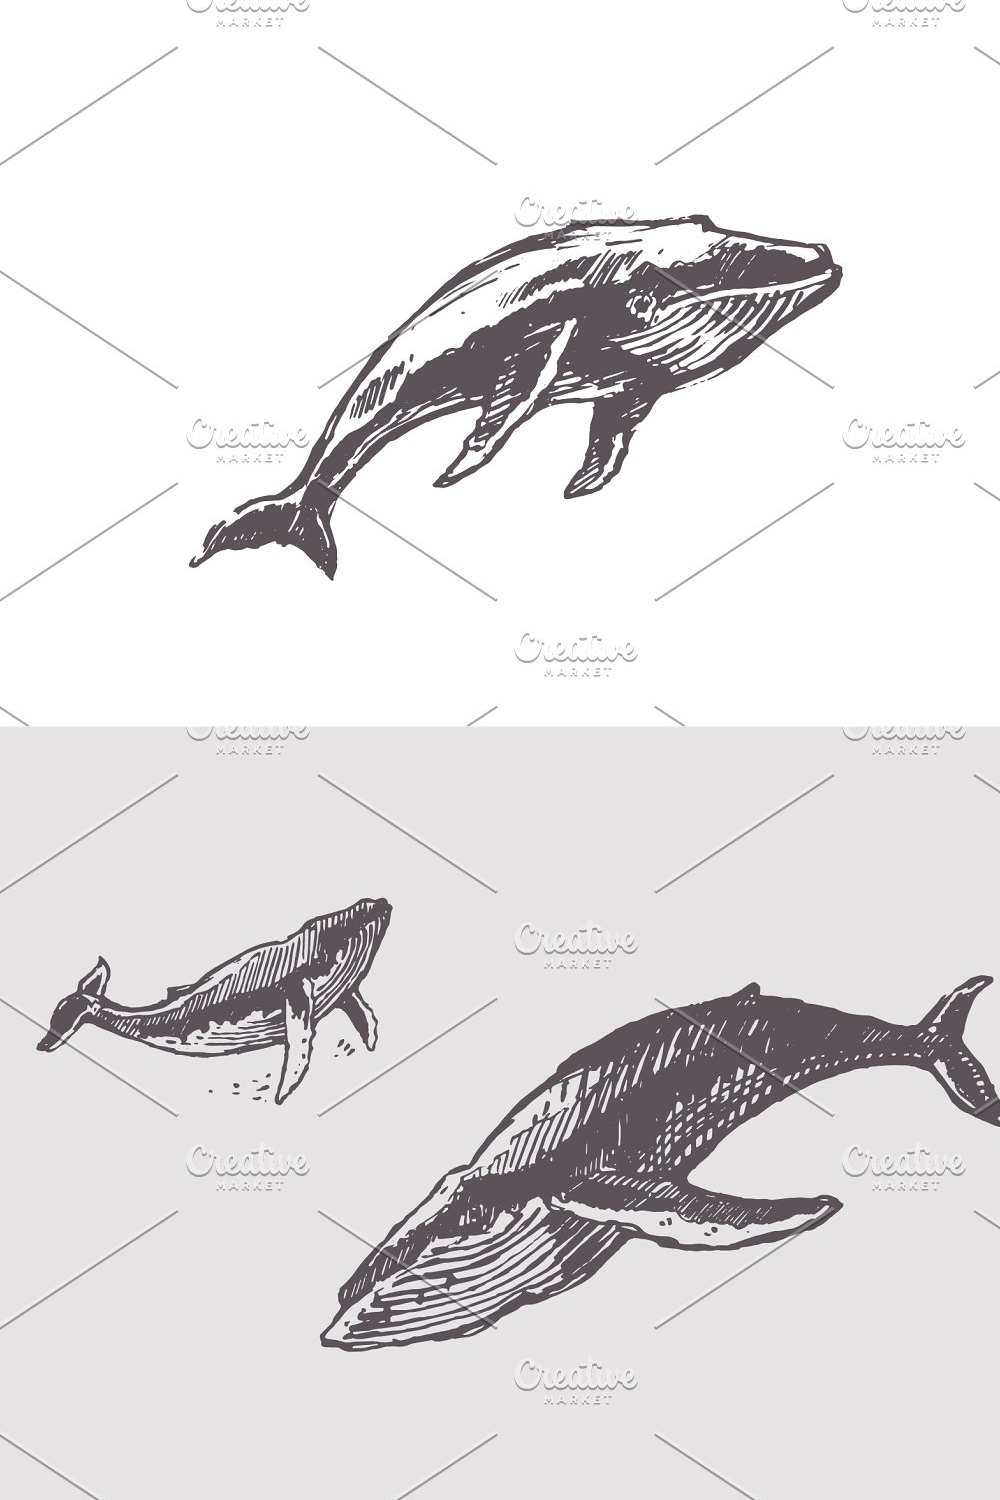 Illustrations sketches of humpback whales pinterest.